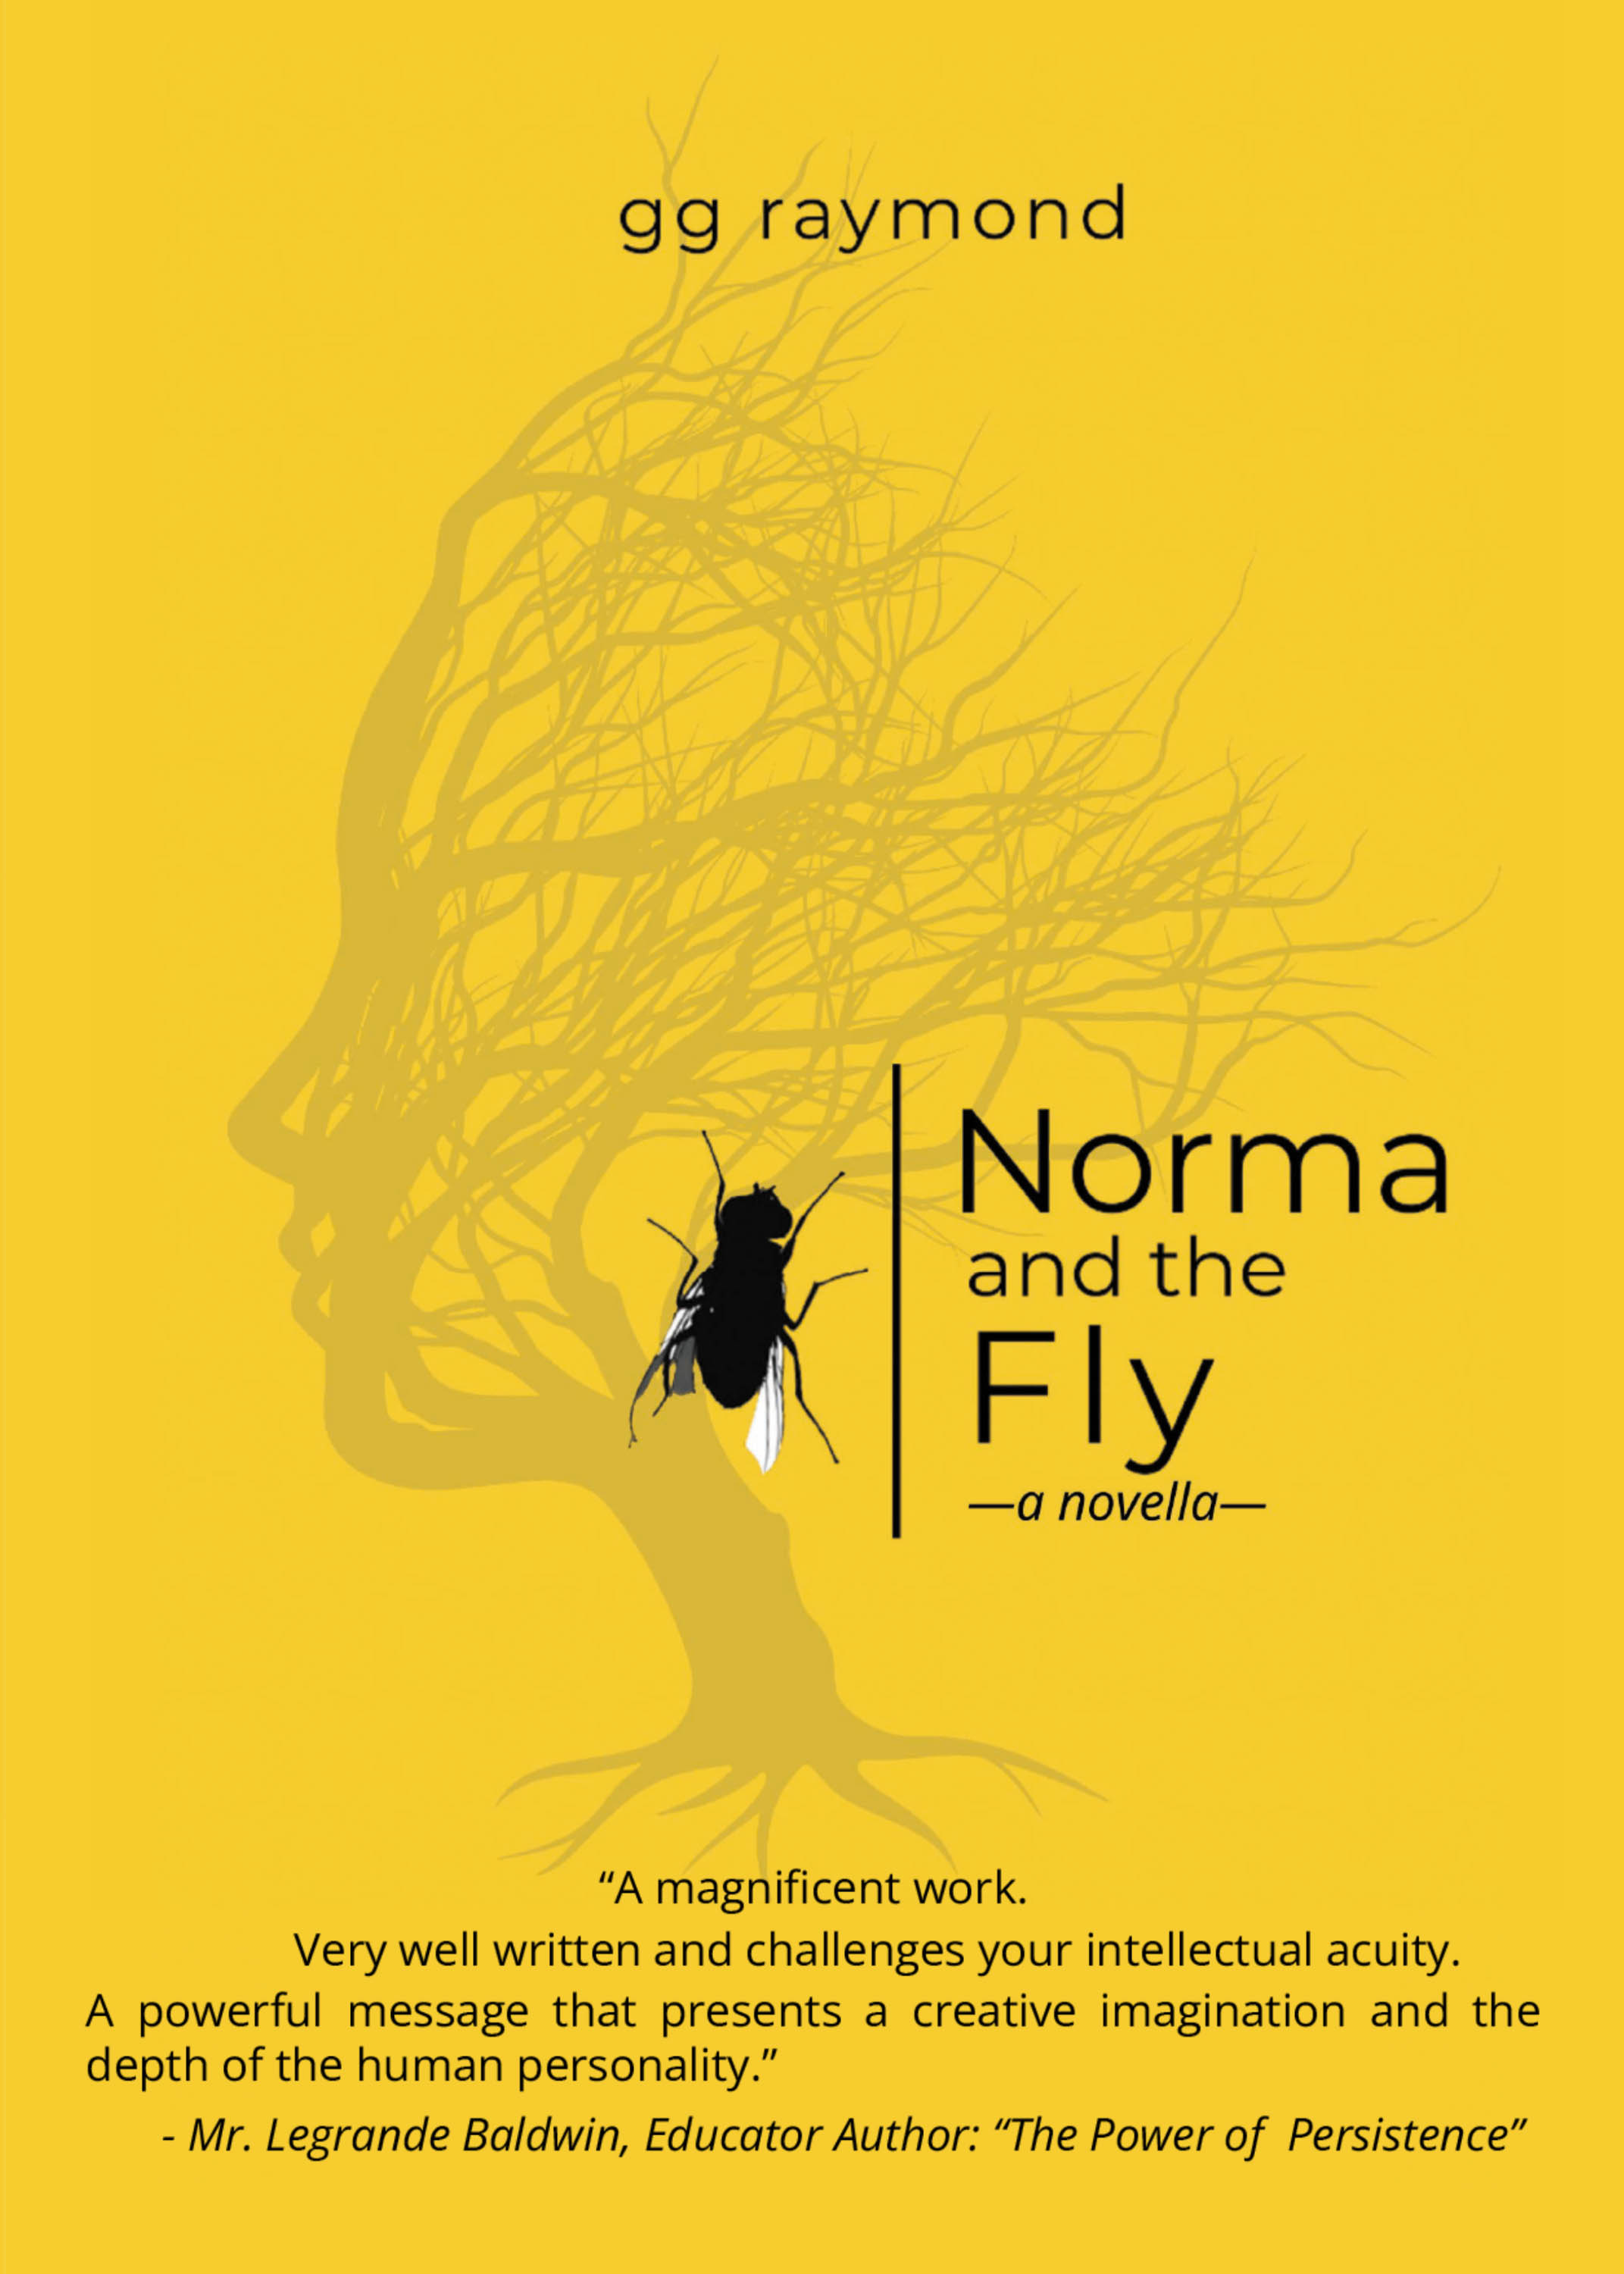 Author gg raymond’s New Book “Norma and the Fly: A Novella” is an Artful Work That Explores What Happens When People Find Themselves Baffled by Life’s Unscripted Detours